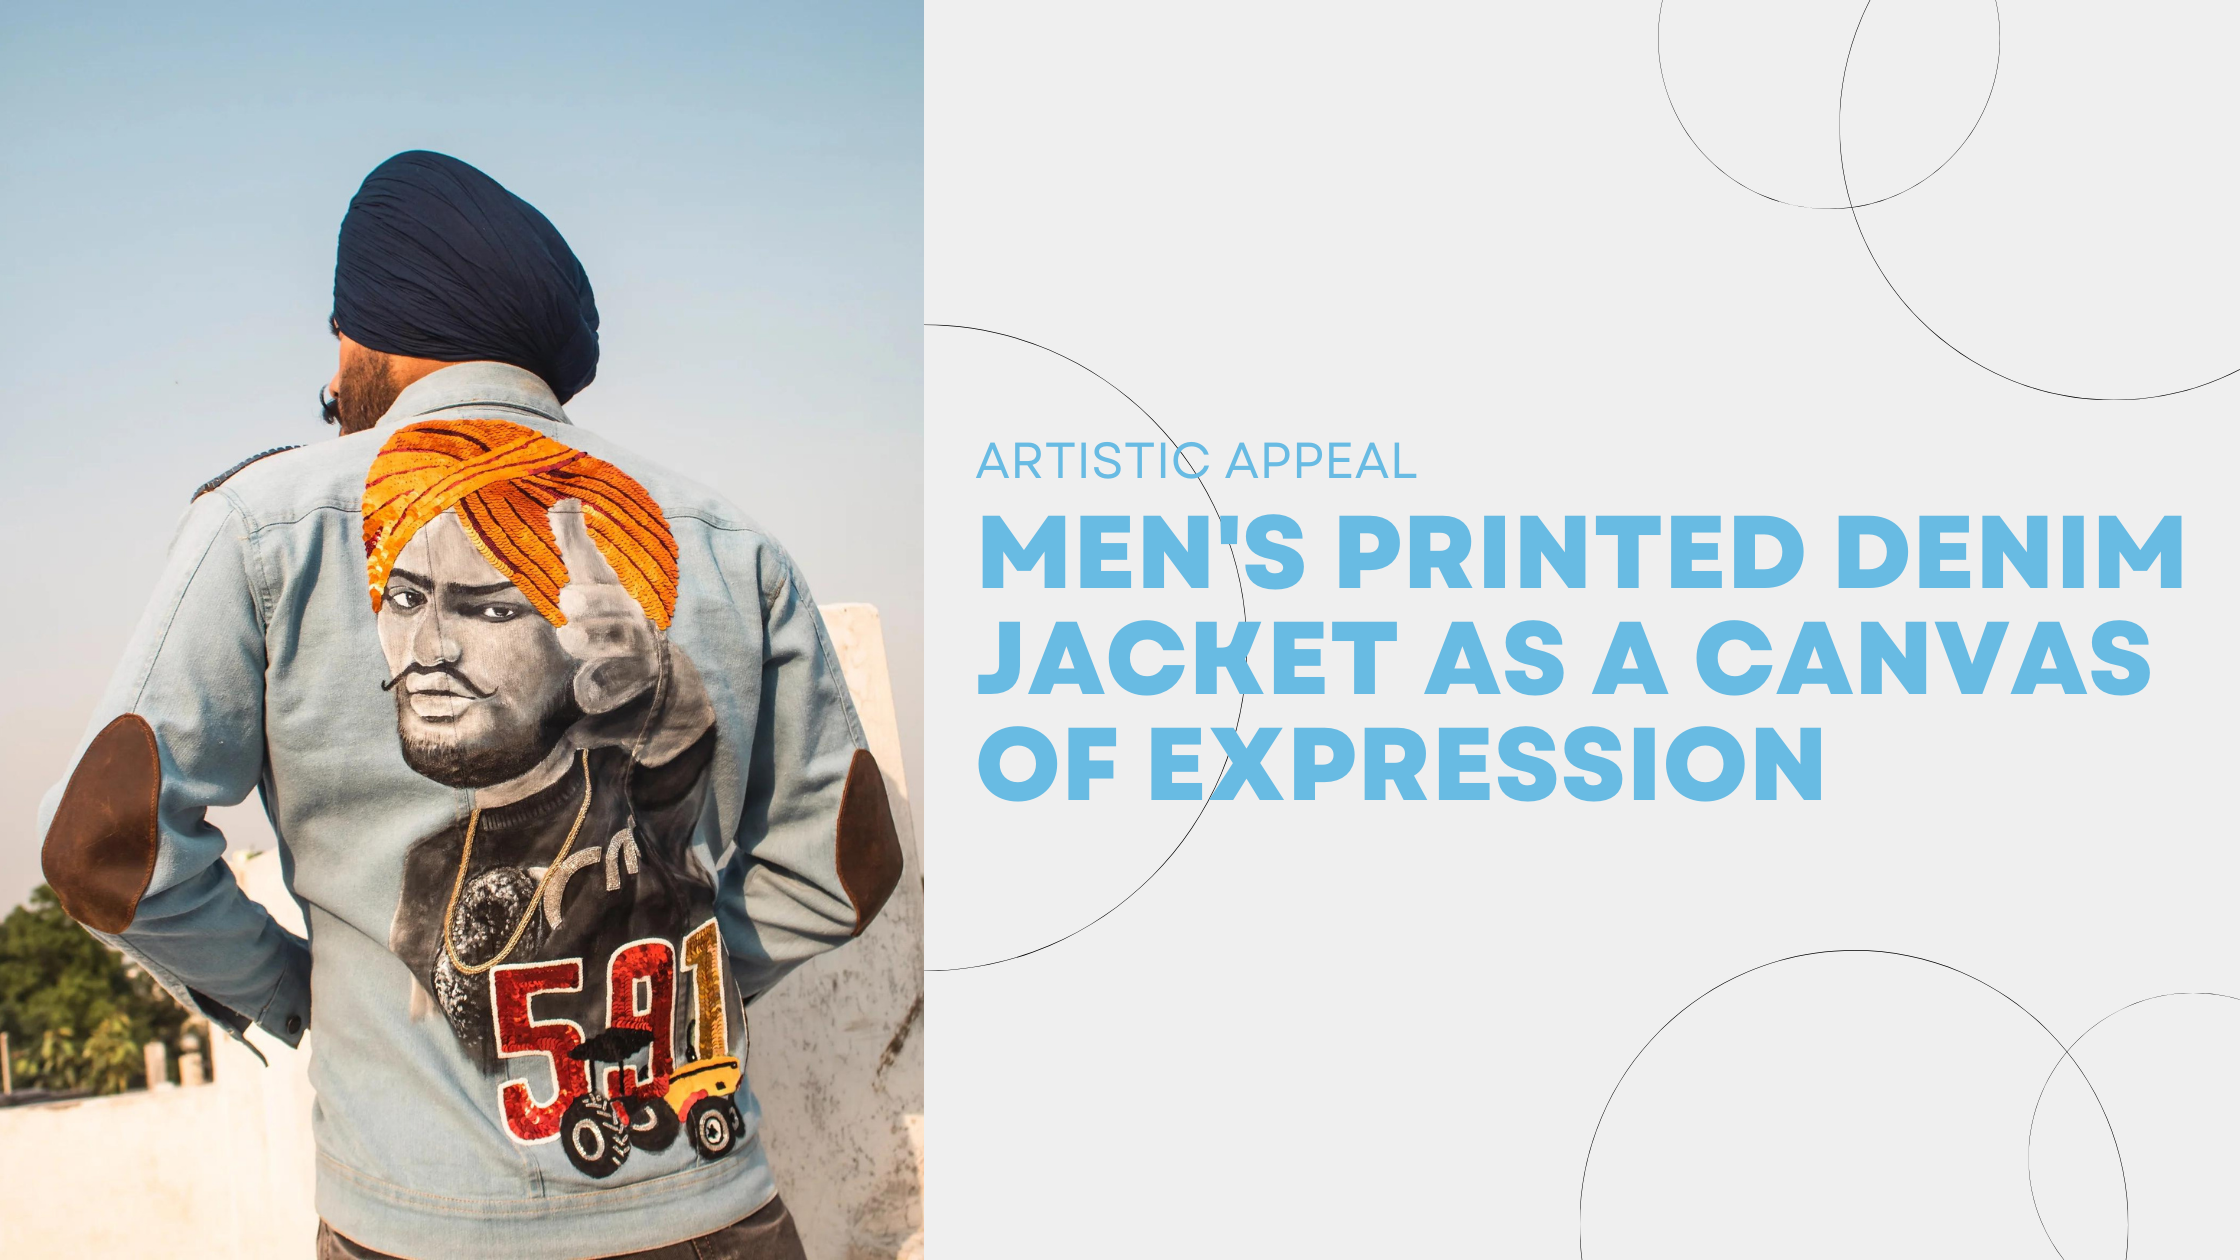 ARTISTIC APPEAL: MEN'S PRINTED DENIM JACKET AS A CANVAS OF EXPRESSION